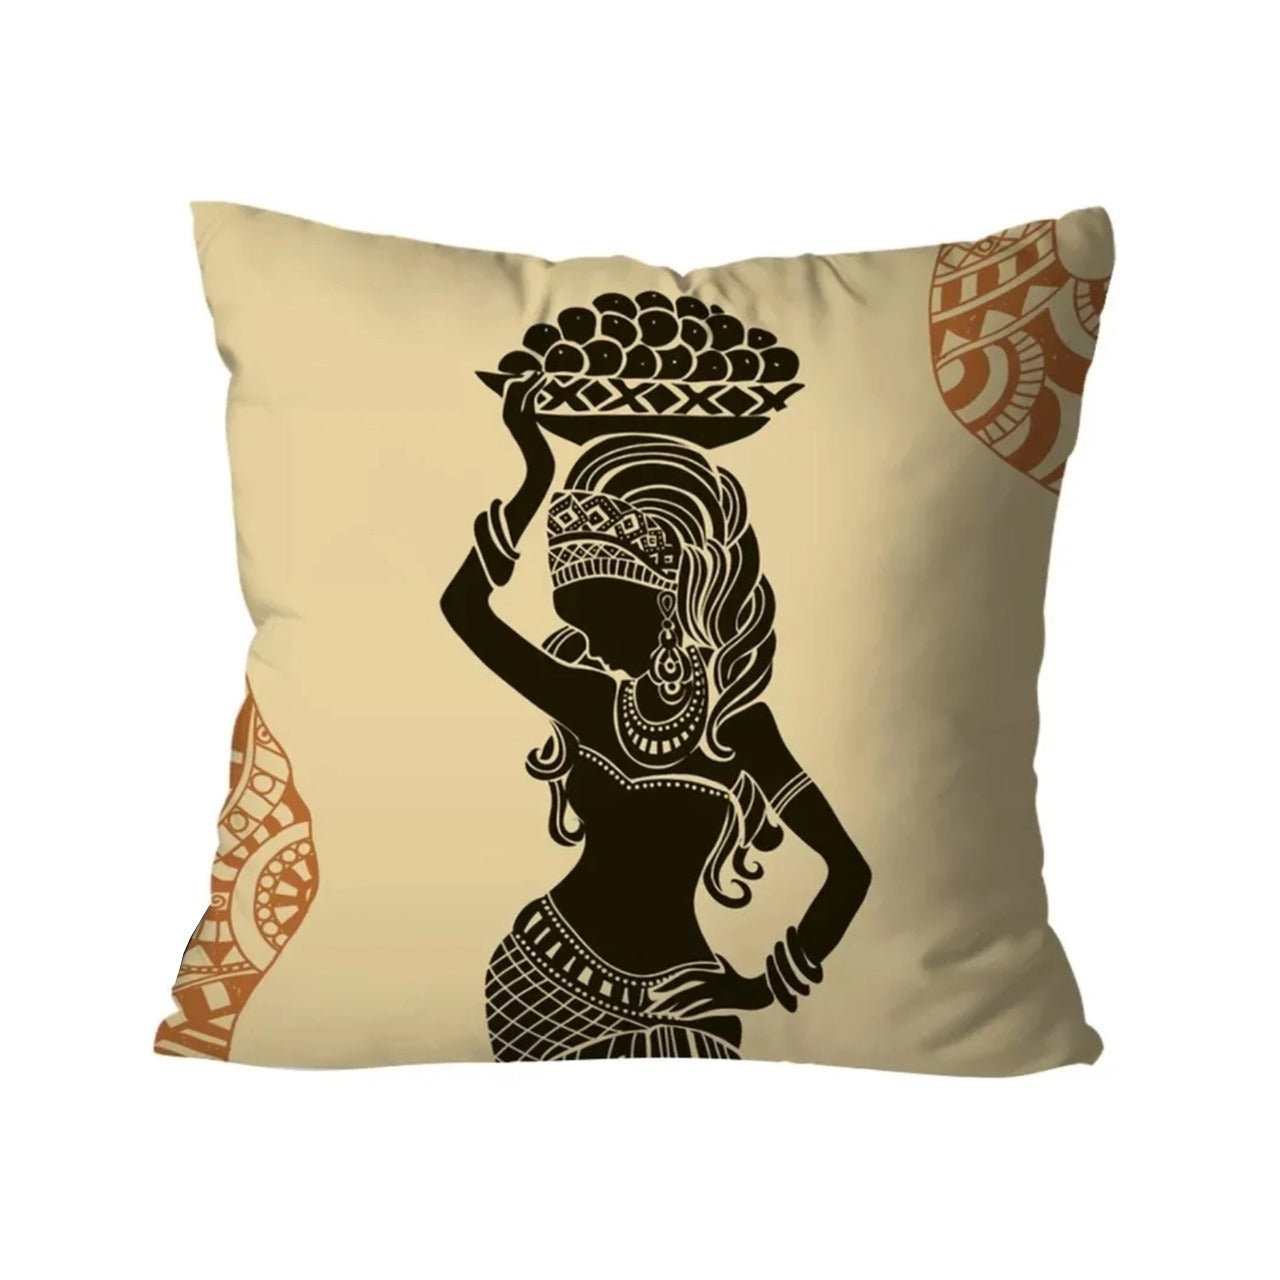 Black Queen Cushion Covers (Pack of 3) - waseeh.com